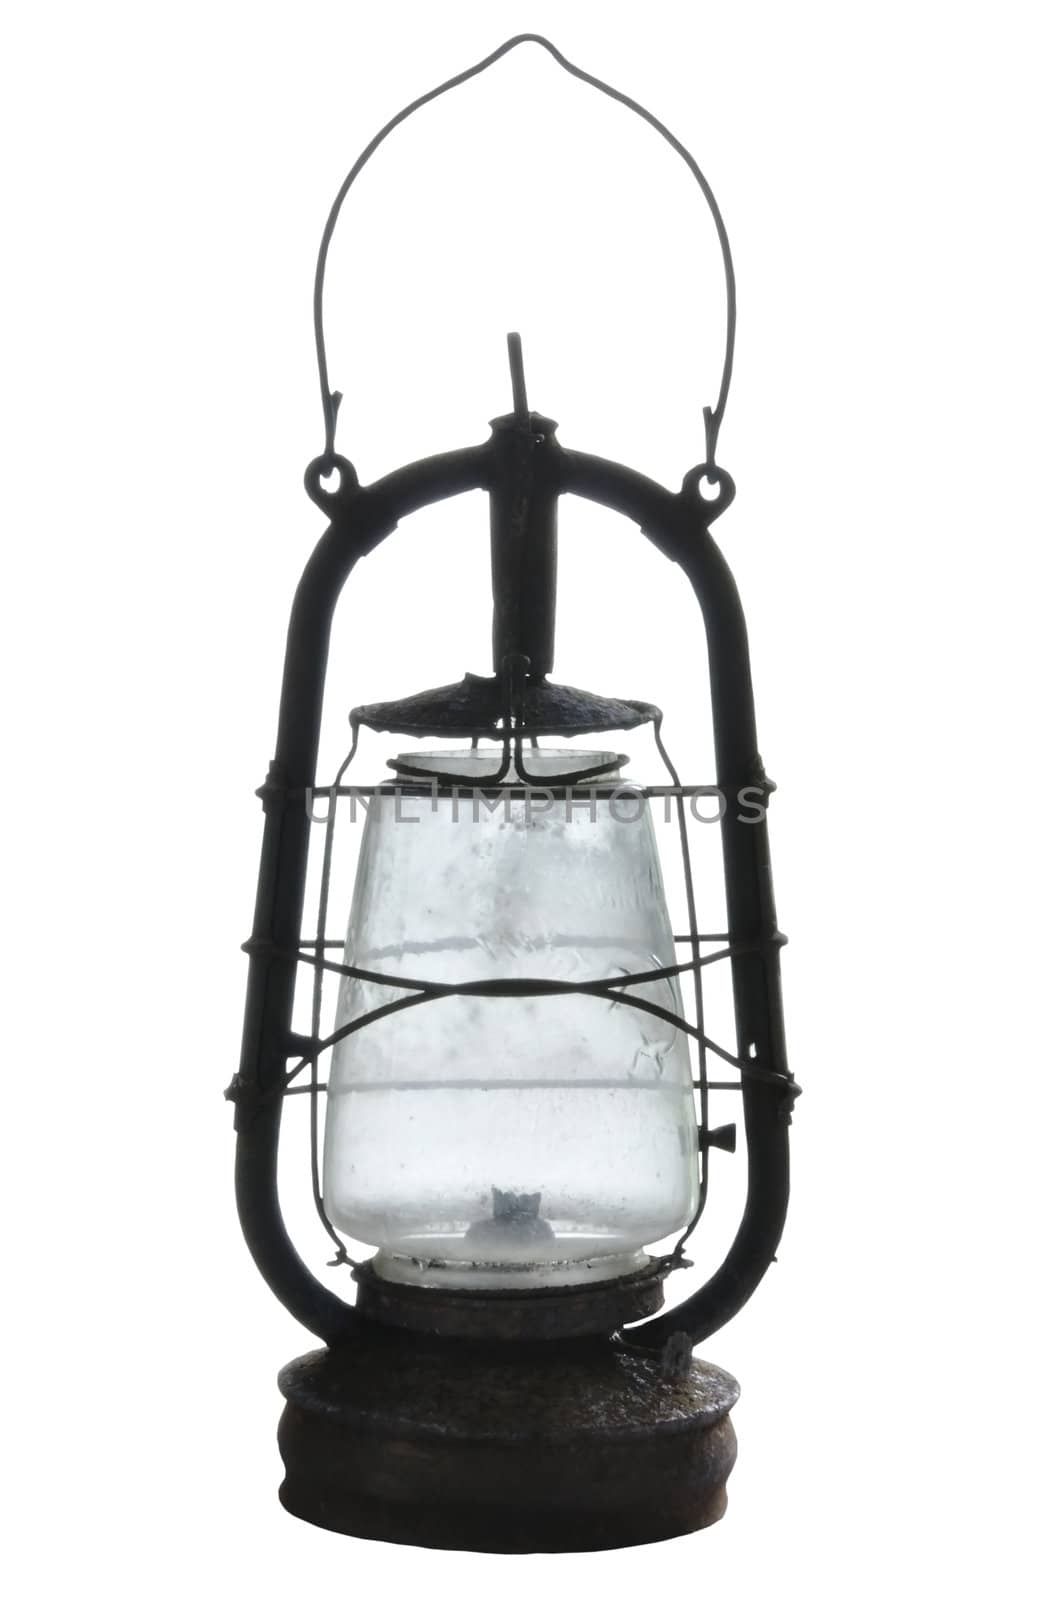 Lantern old iron rusty brown color